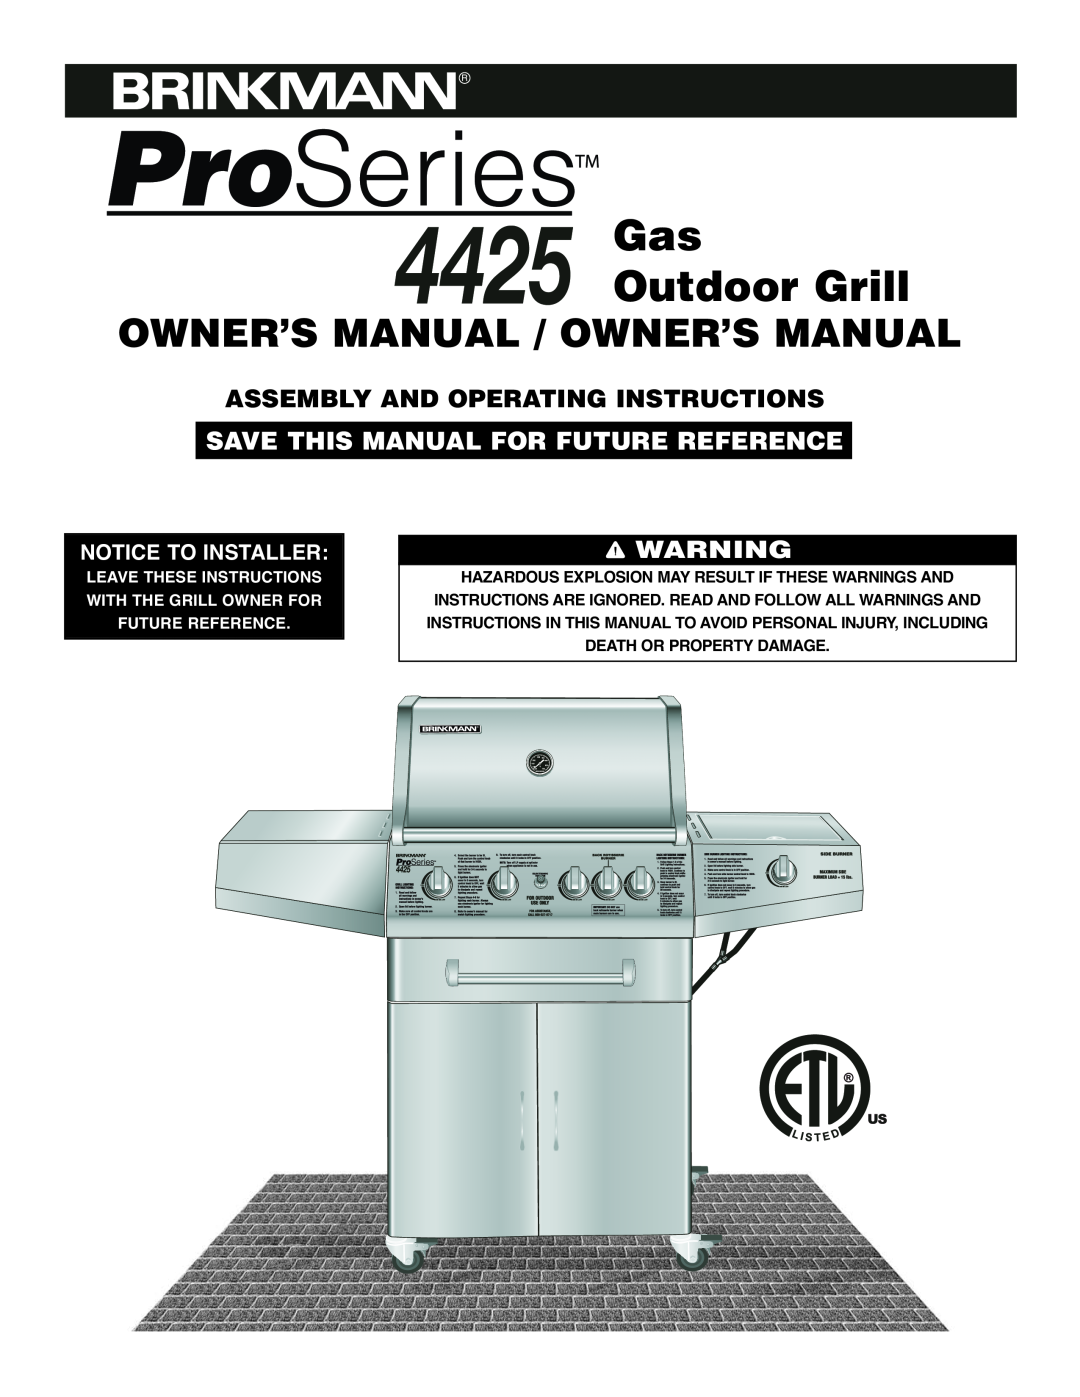 Brinkmann owner manual Gas 4425 Outdoor Grill, Owner’S Manual / Owner’S Manual, Save This Manual For Future Reference 